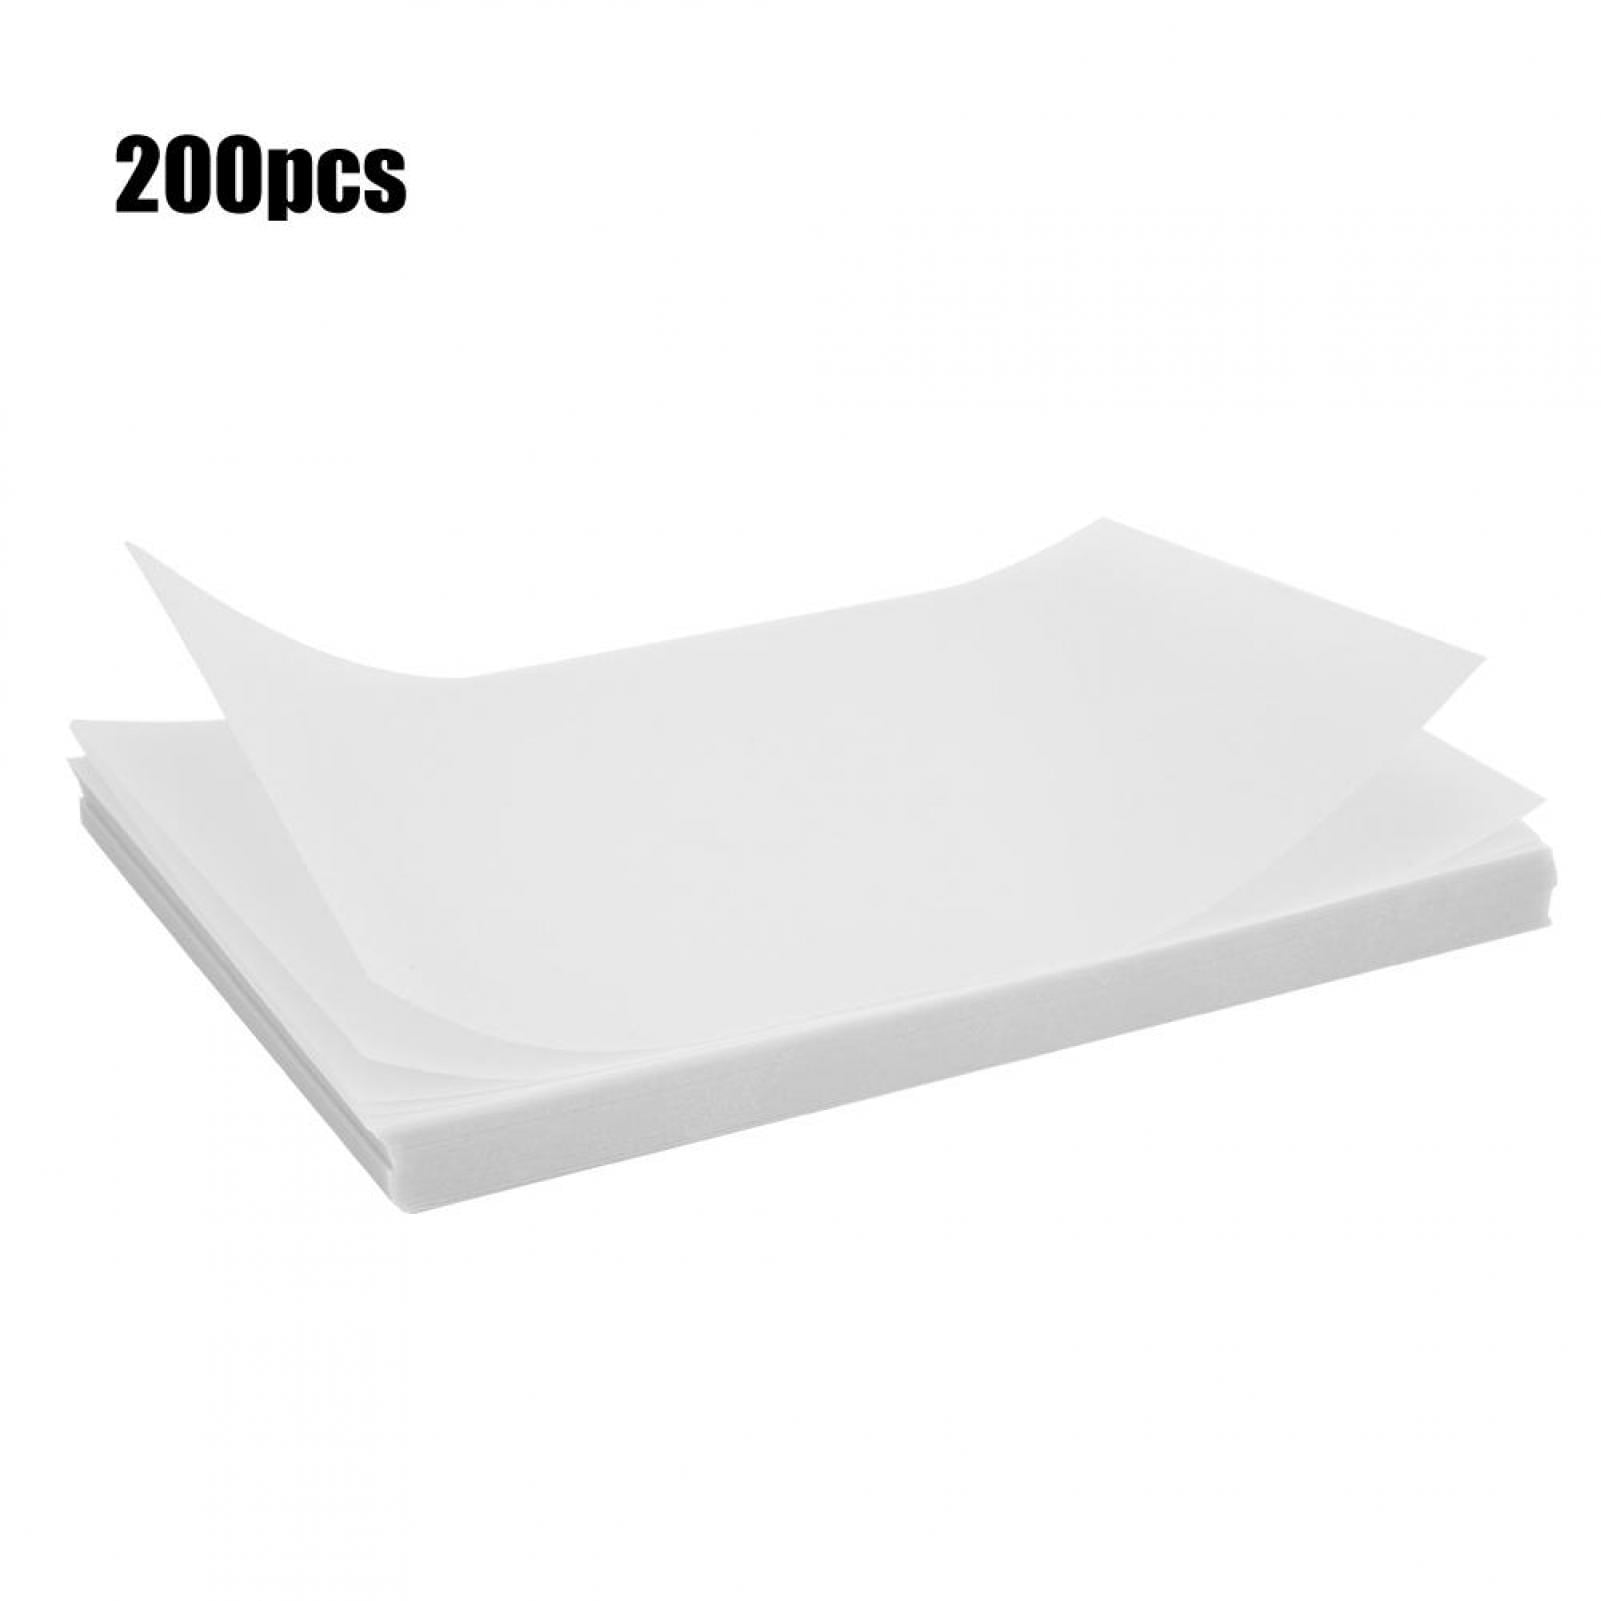 Buy Aodoor Tracing Paper, Natural transparent trace paper A4 for